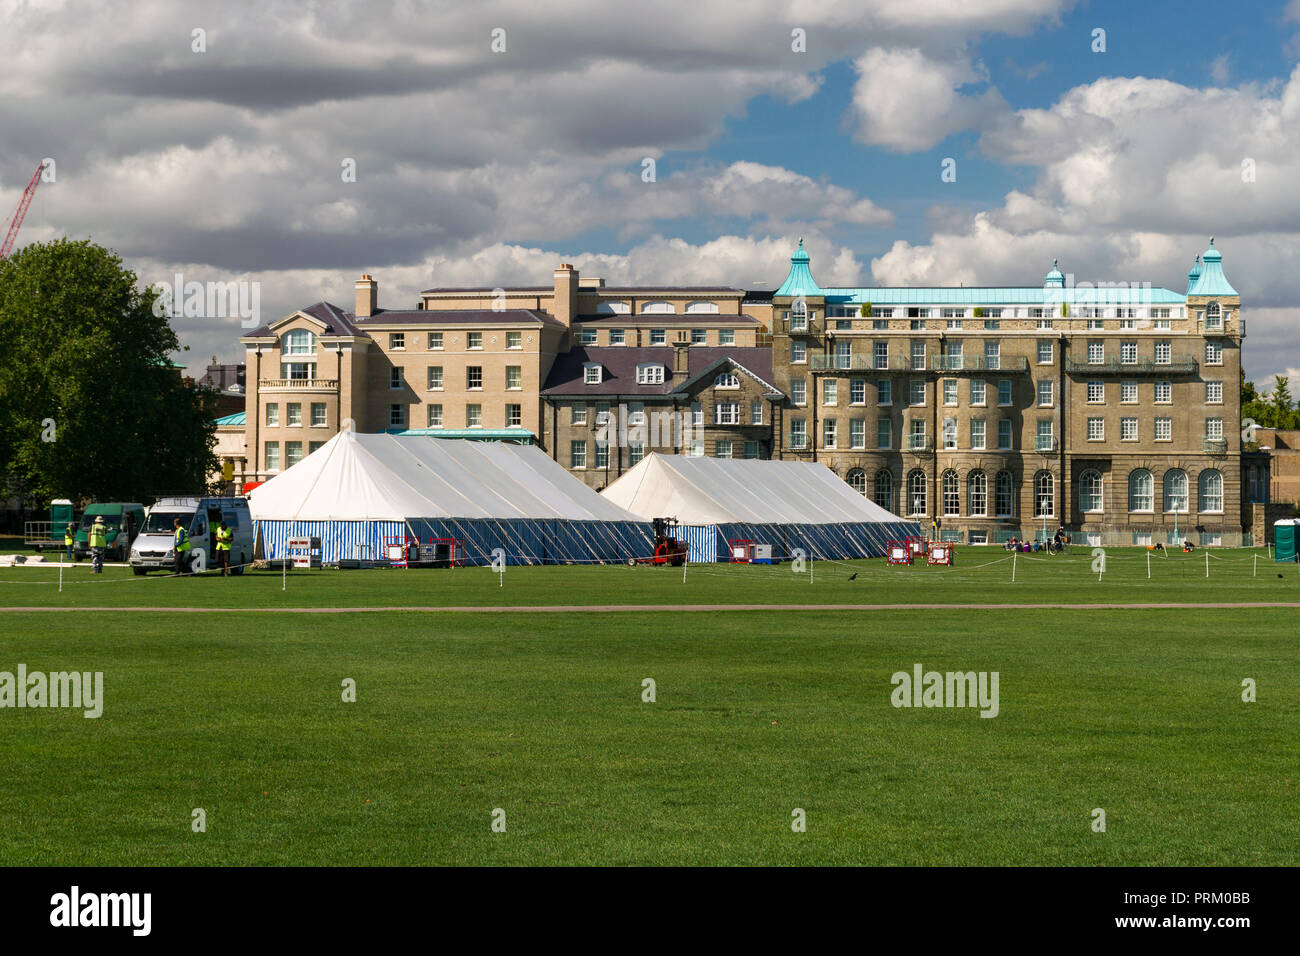 View of University Arms hotel with Parker's Piece grass park with marquees being erected on it, Cambridge, UK Stock Photo